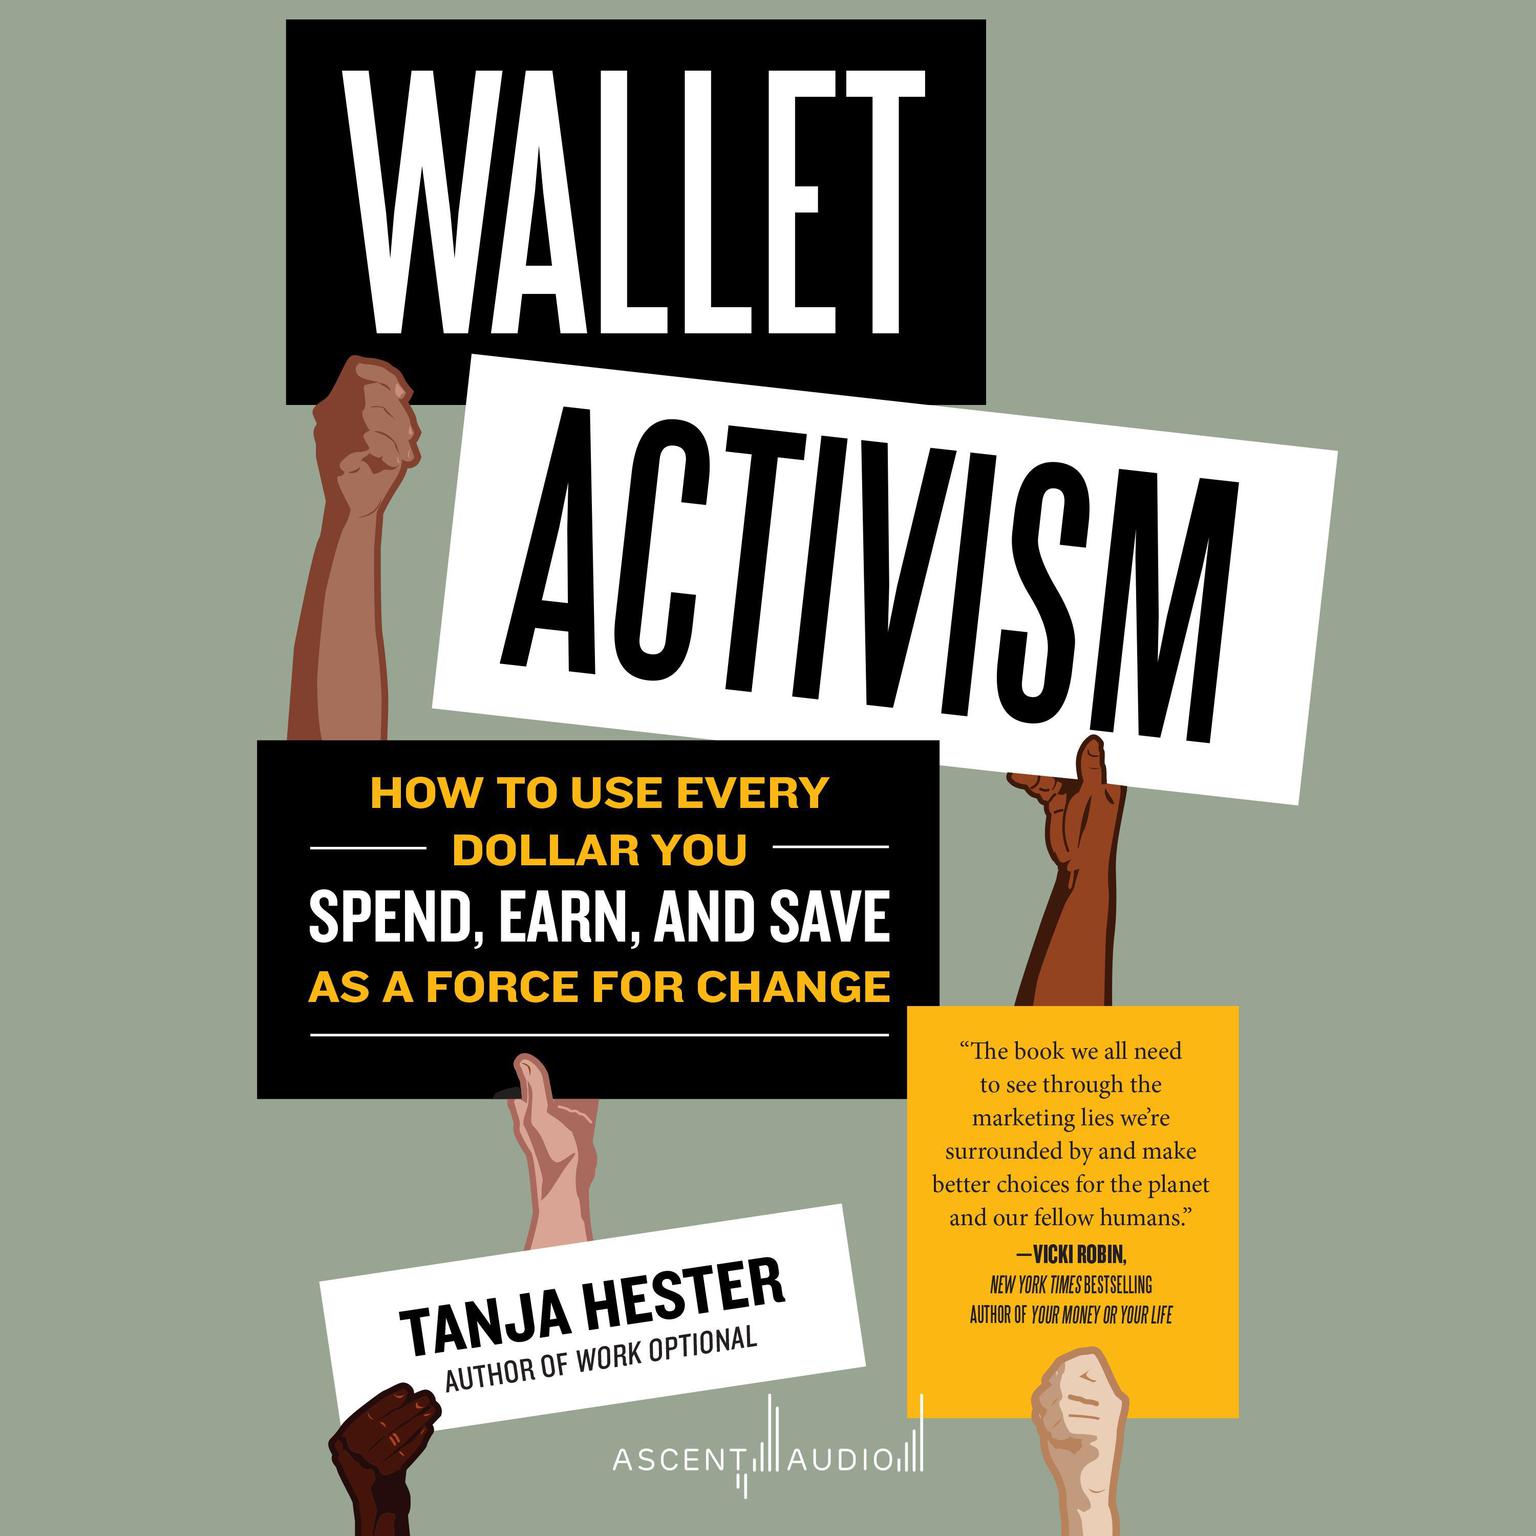 Wallet Activism: How to Use Every Dollar You Spend, Earn, and Save as a Force for Change Audiobook, by Tanja Hester